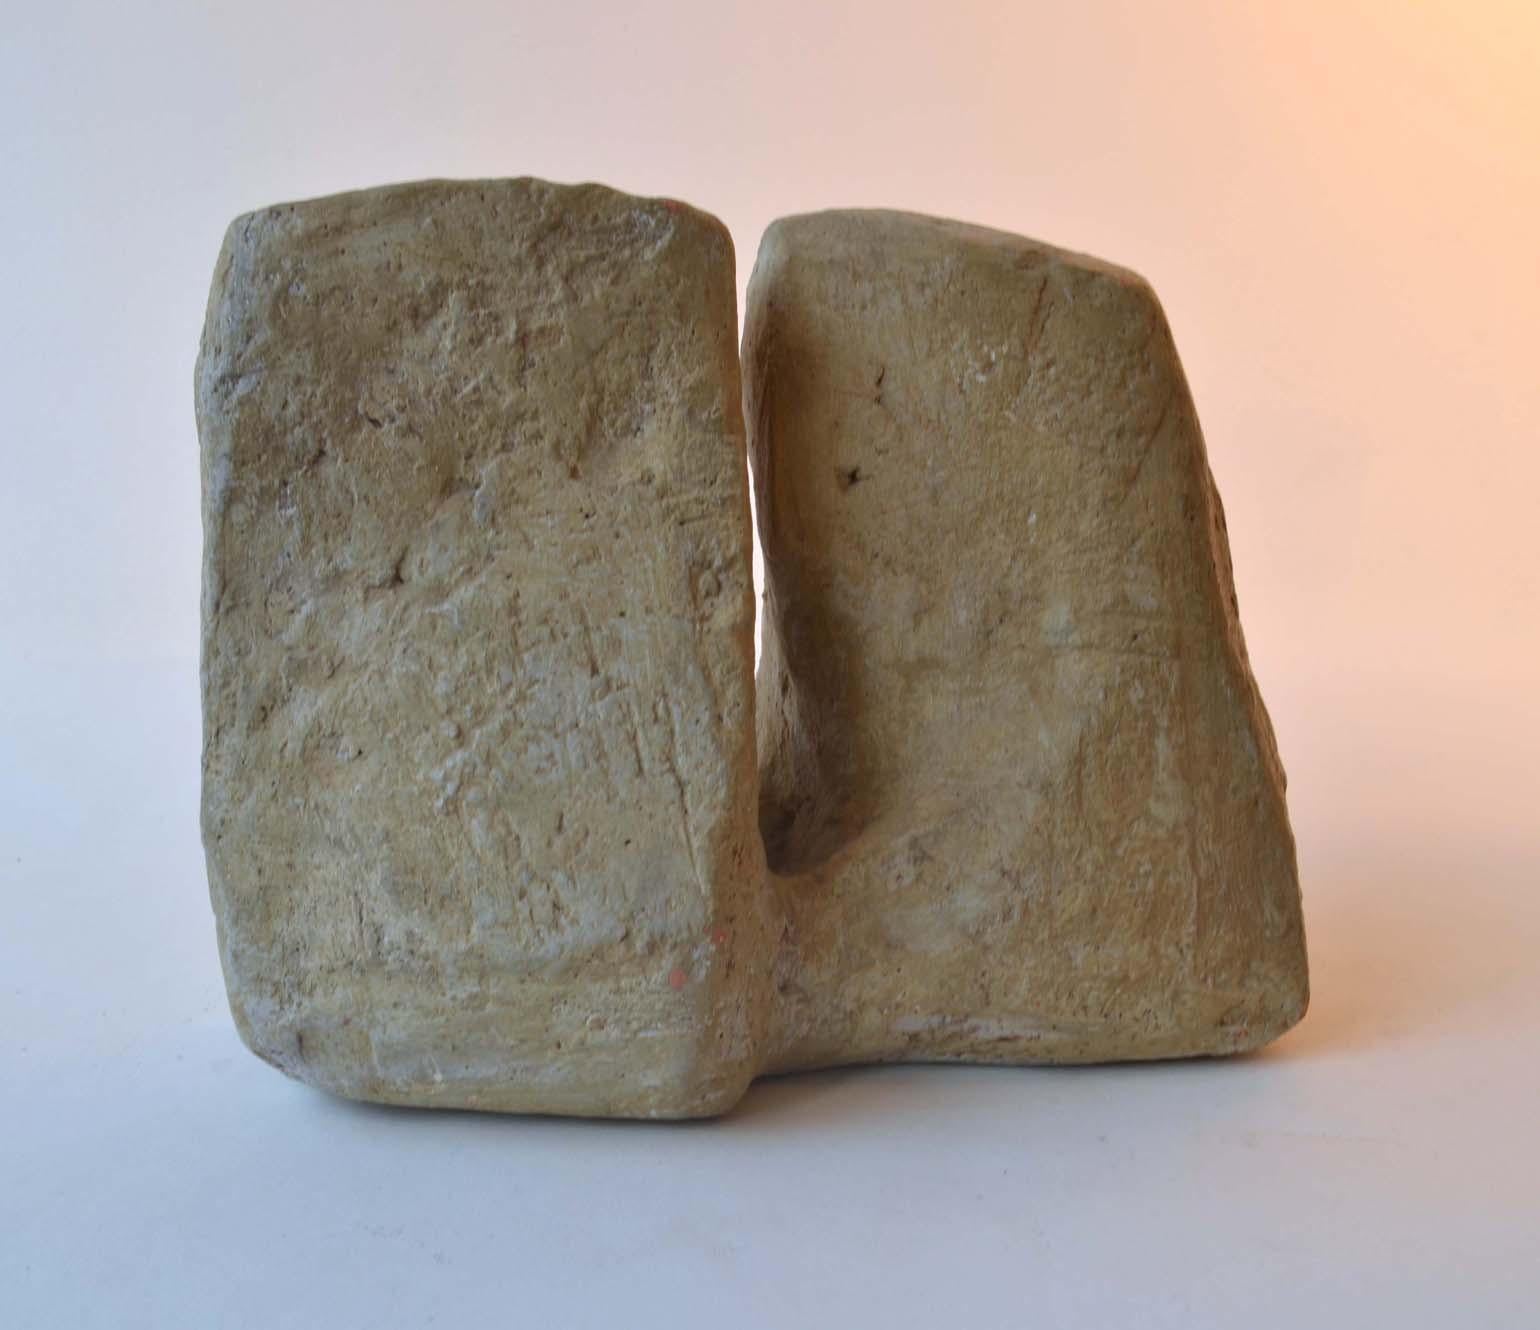 Late 20th Century Abstract Sculpture by Bryan Blow Based on Sandstone Rocks